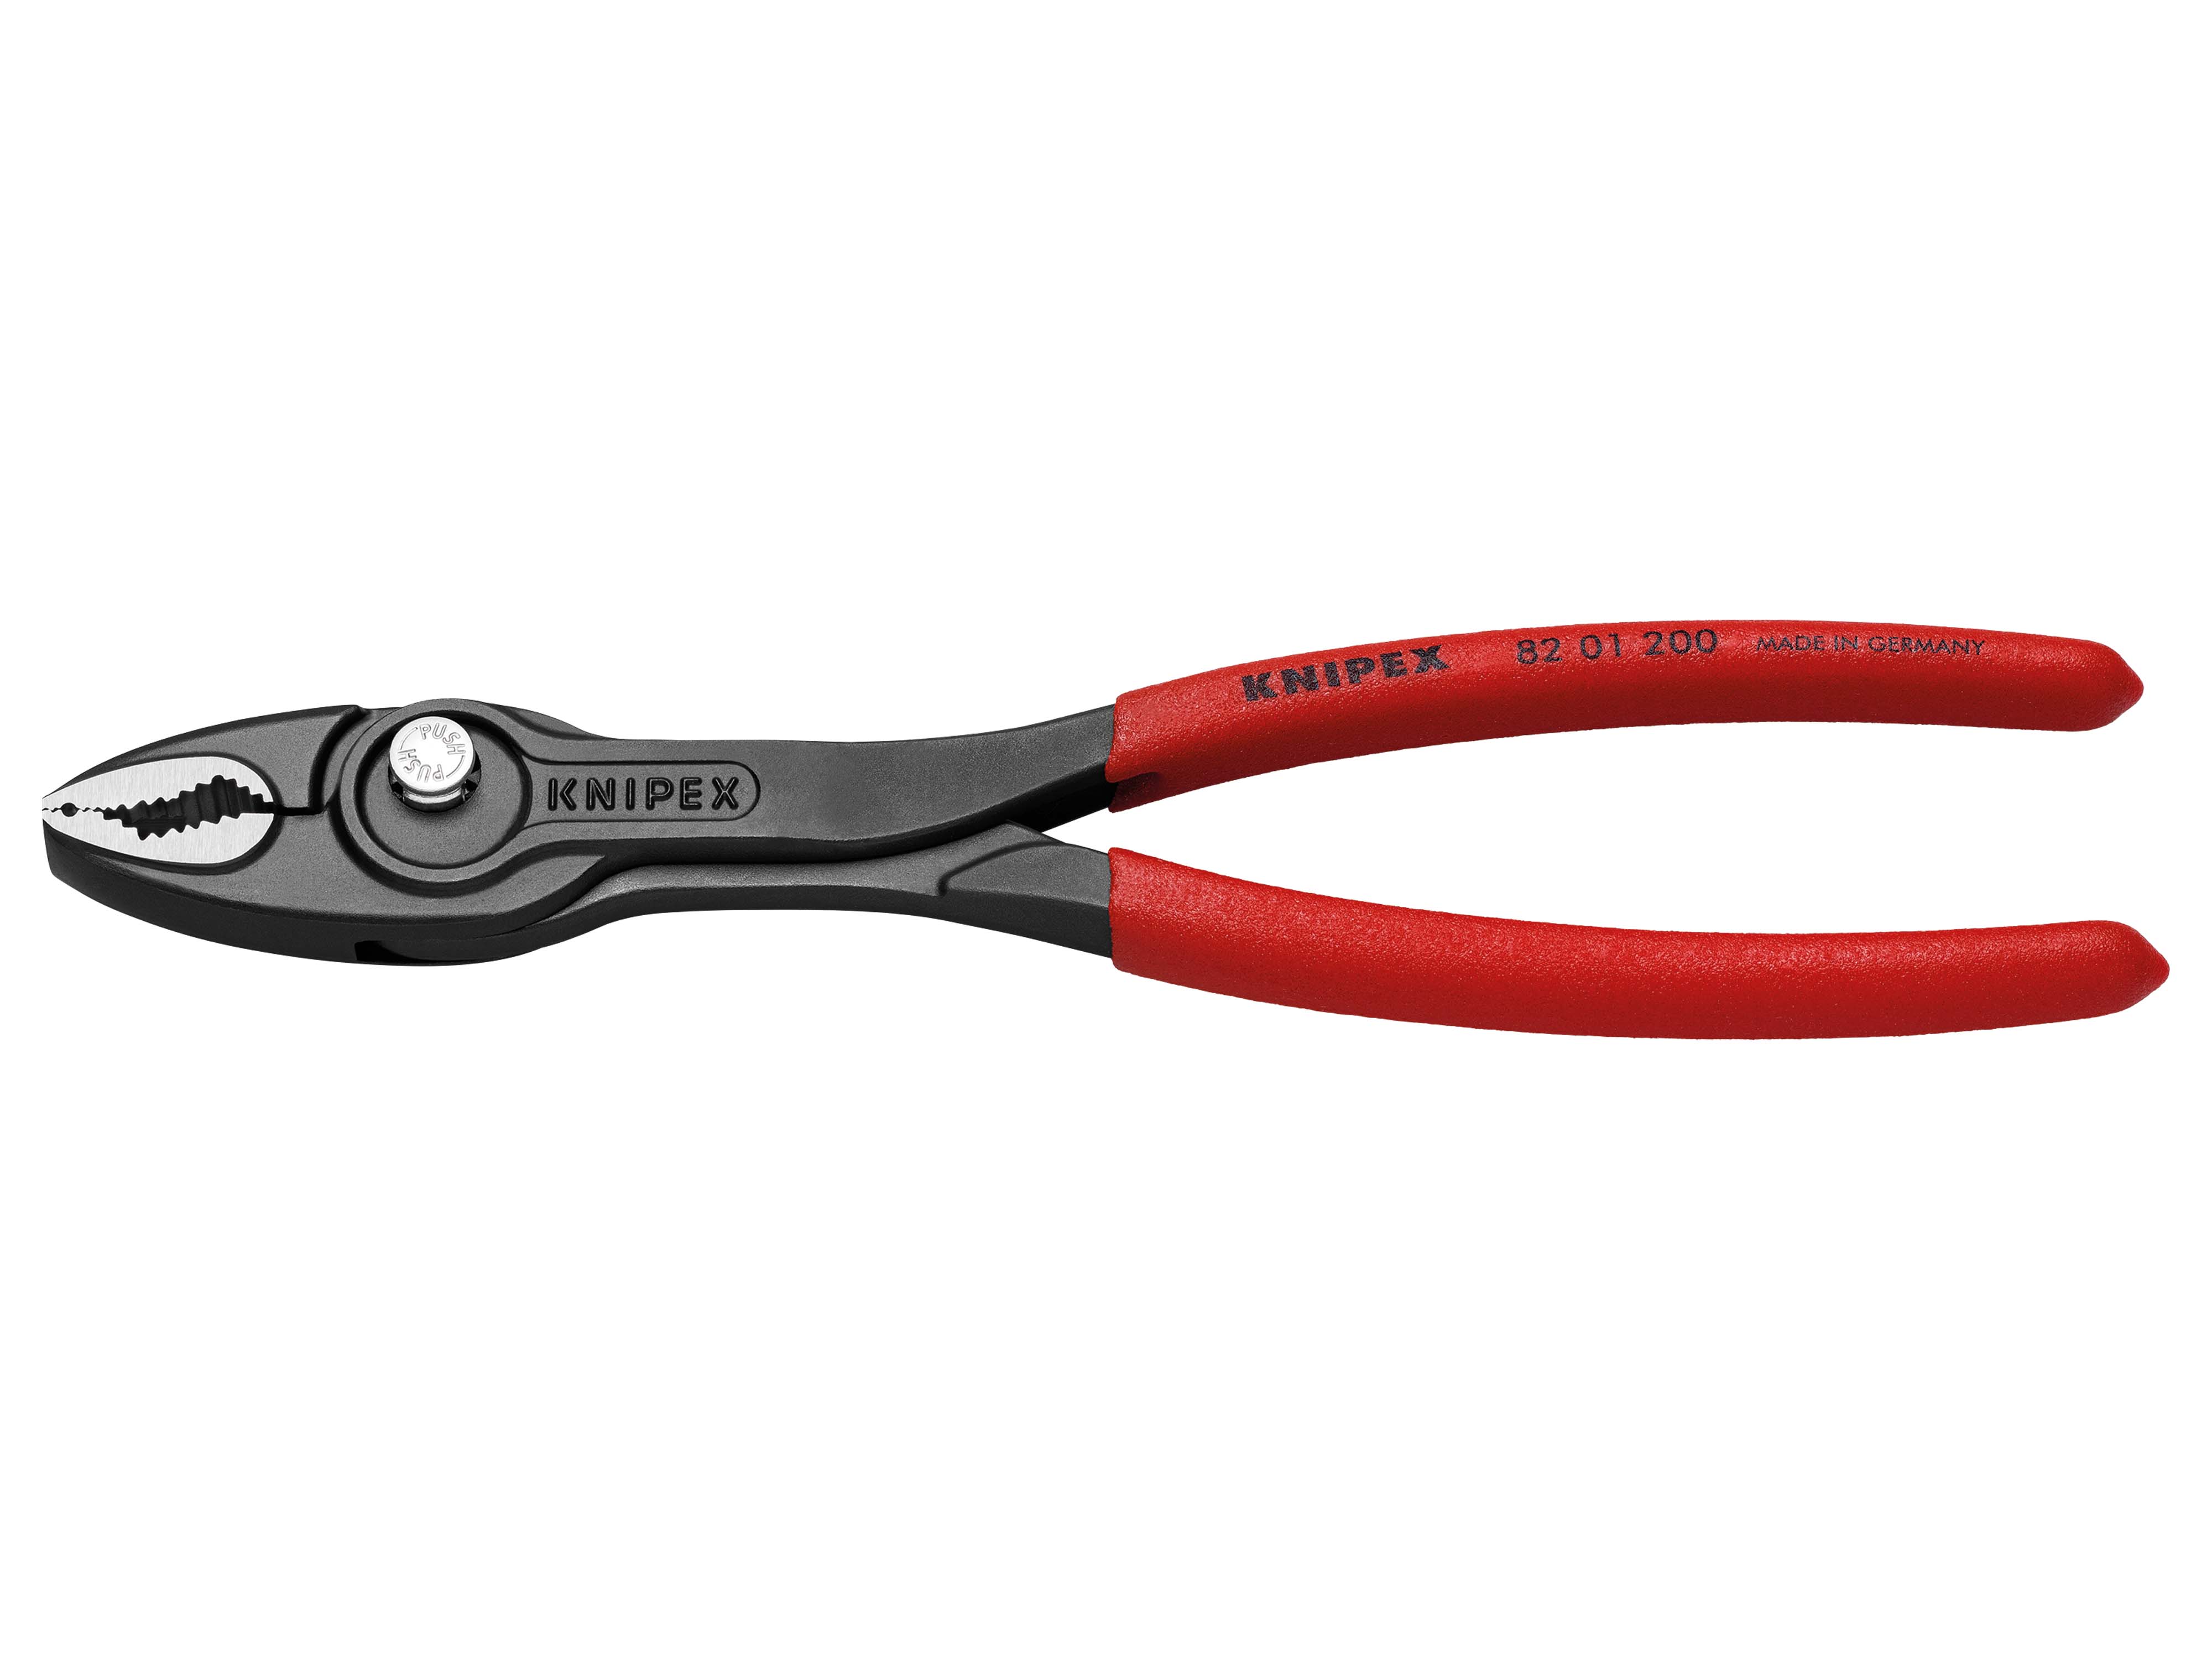 KNIPEX Frontgreifzange, TwinGrip, 200 mm, 82 01 200